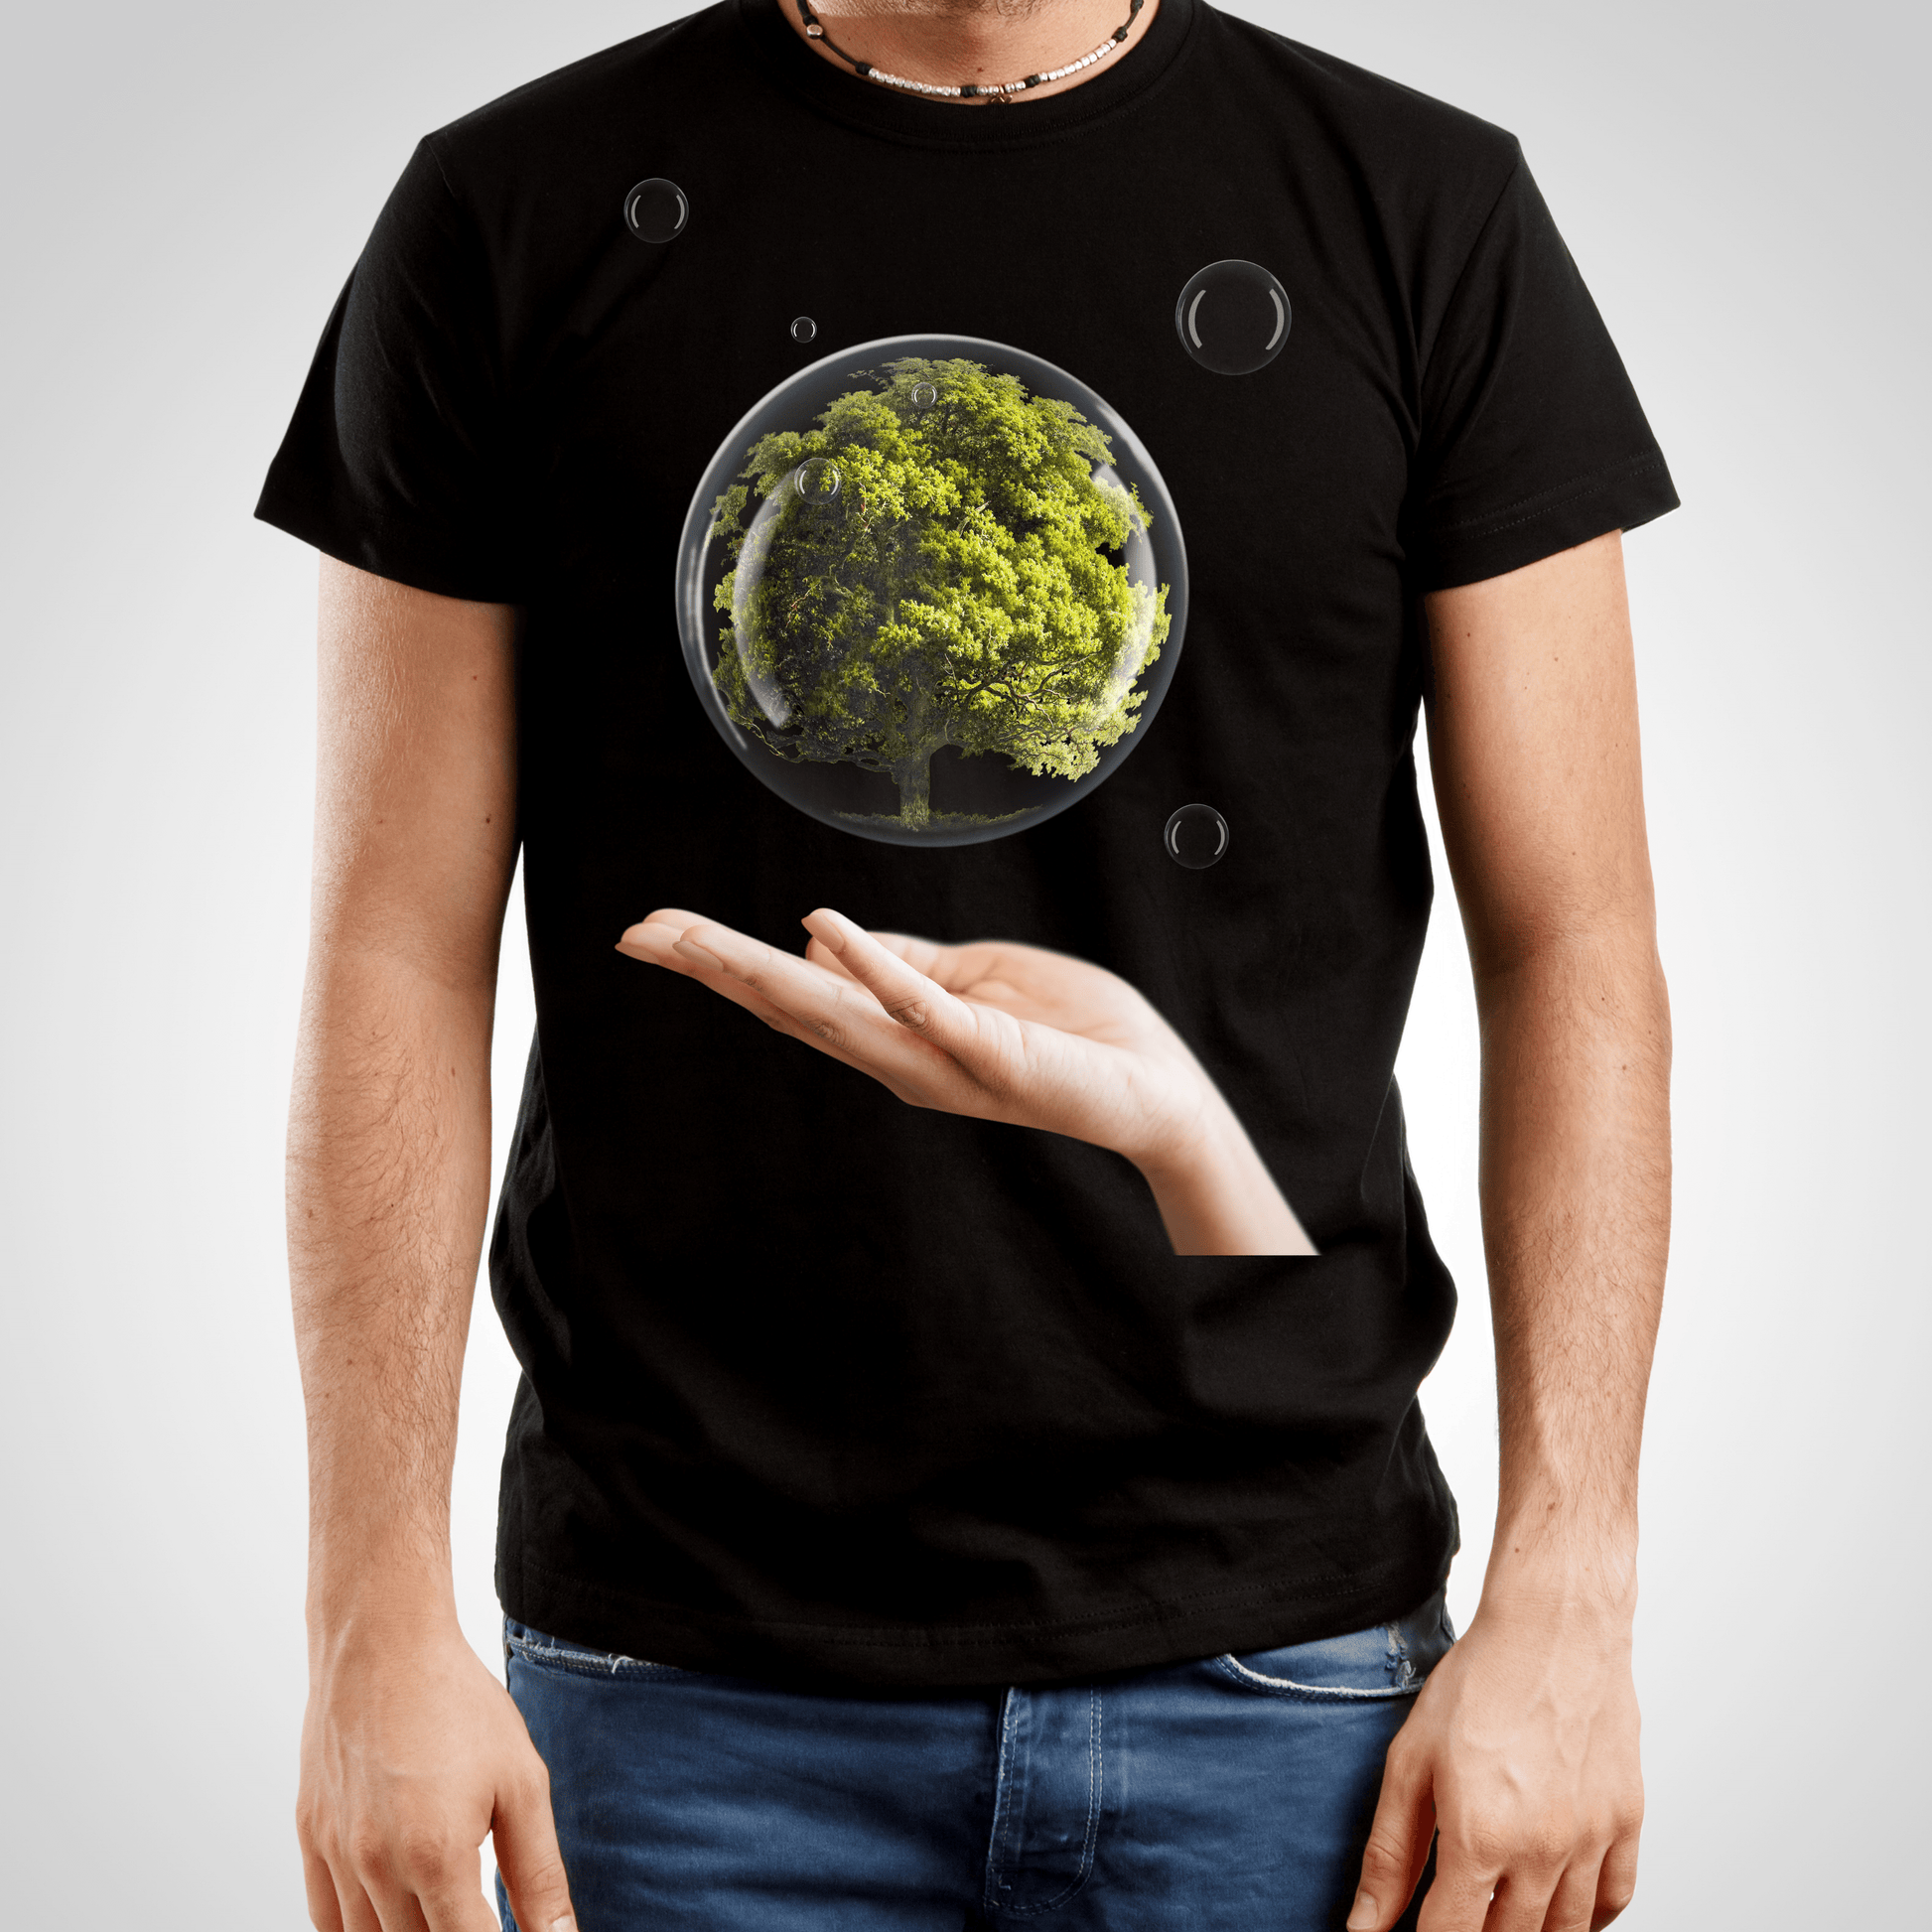 Save Our Earth shirt